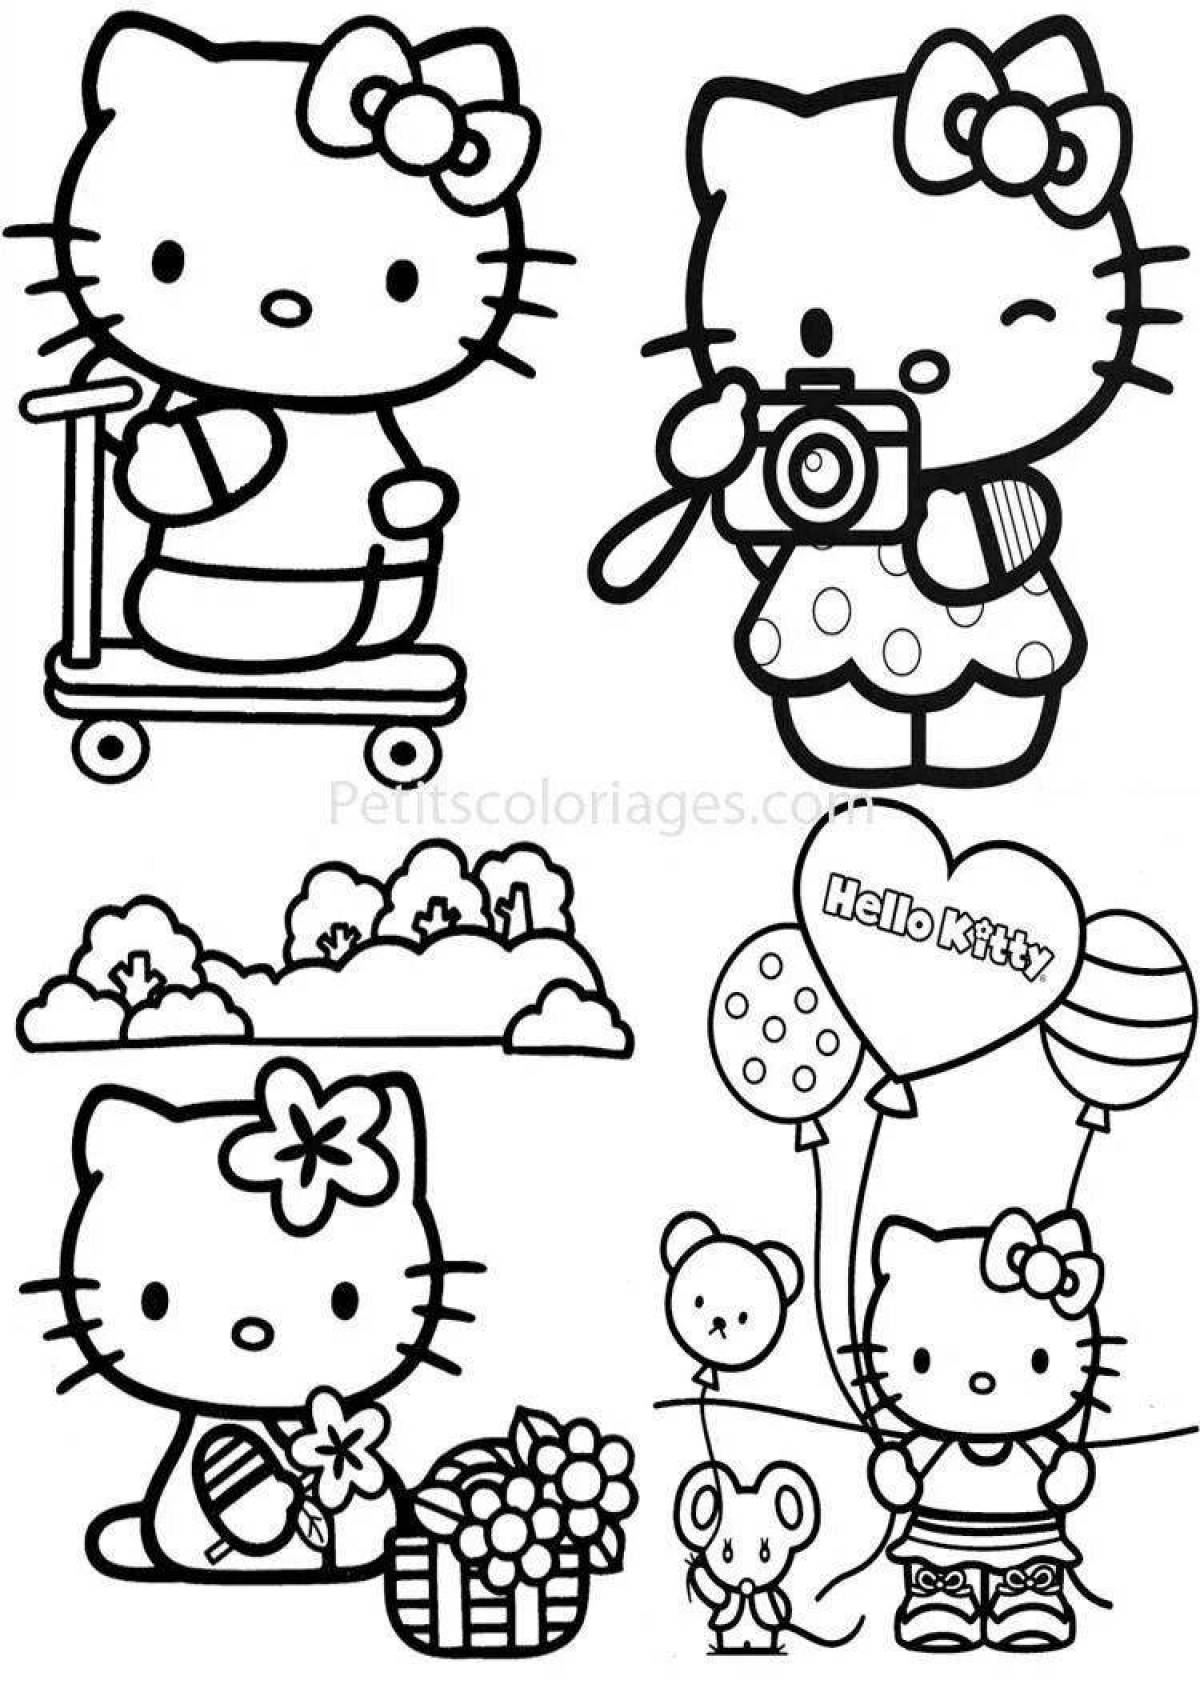 Bright coloring hello kitty, black and white